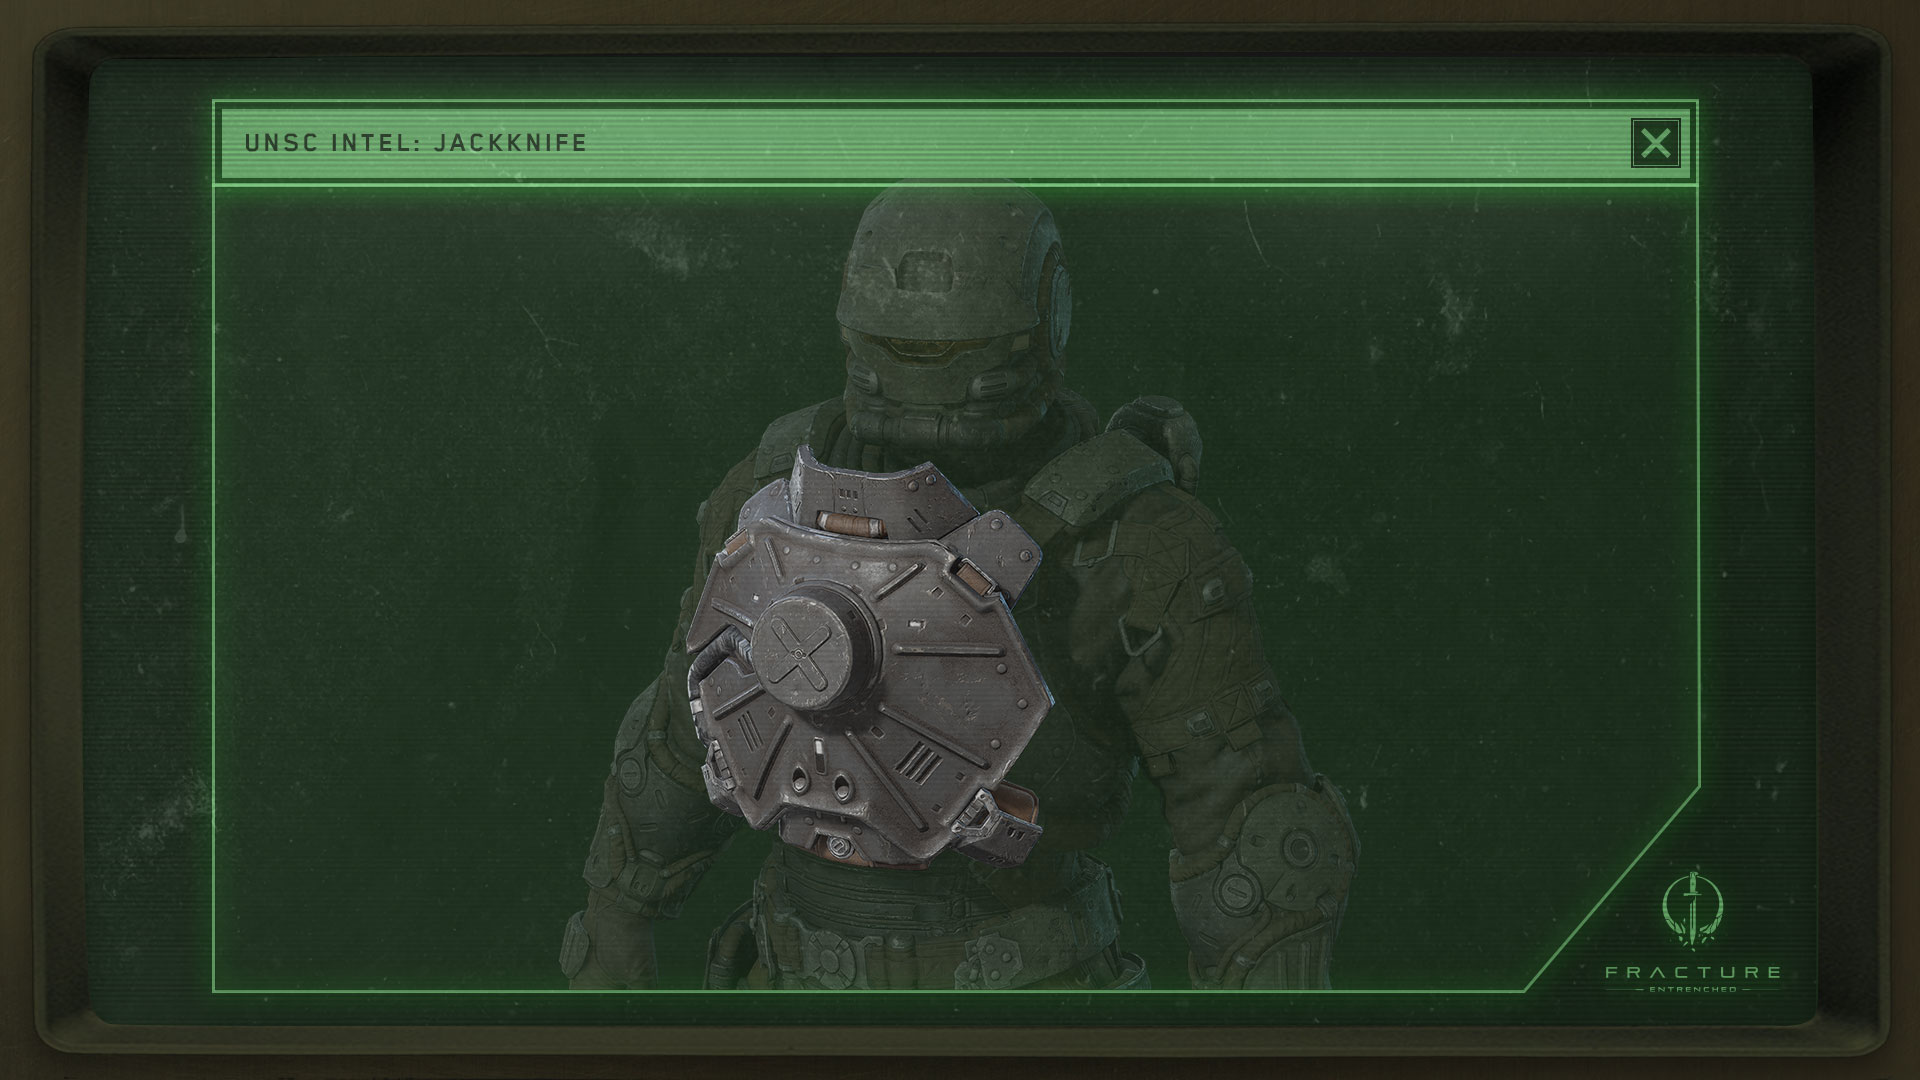 UNSC Intel image of JACKNIFE chest attachment